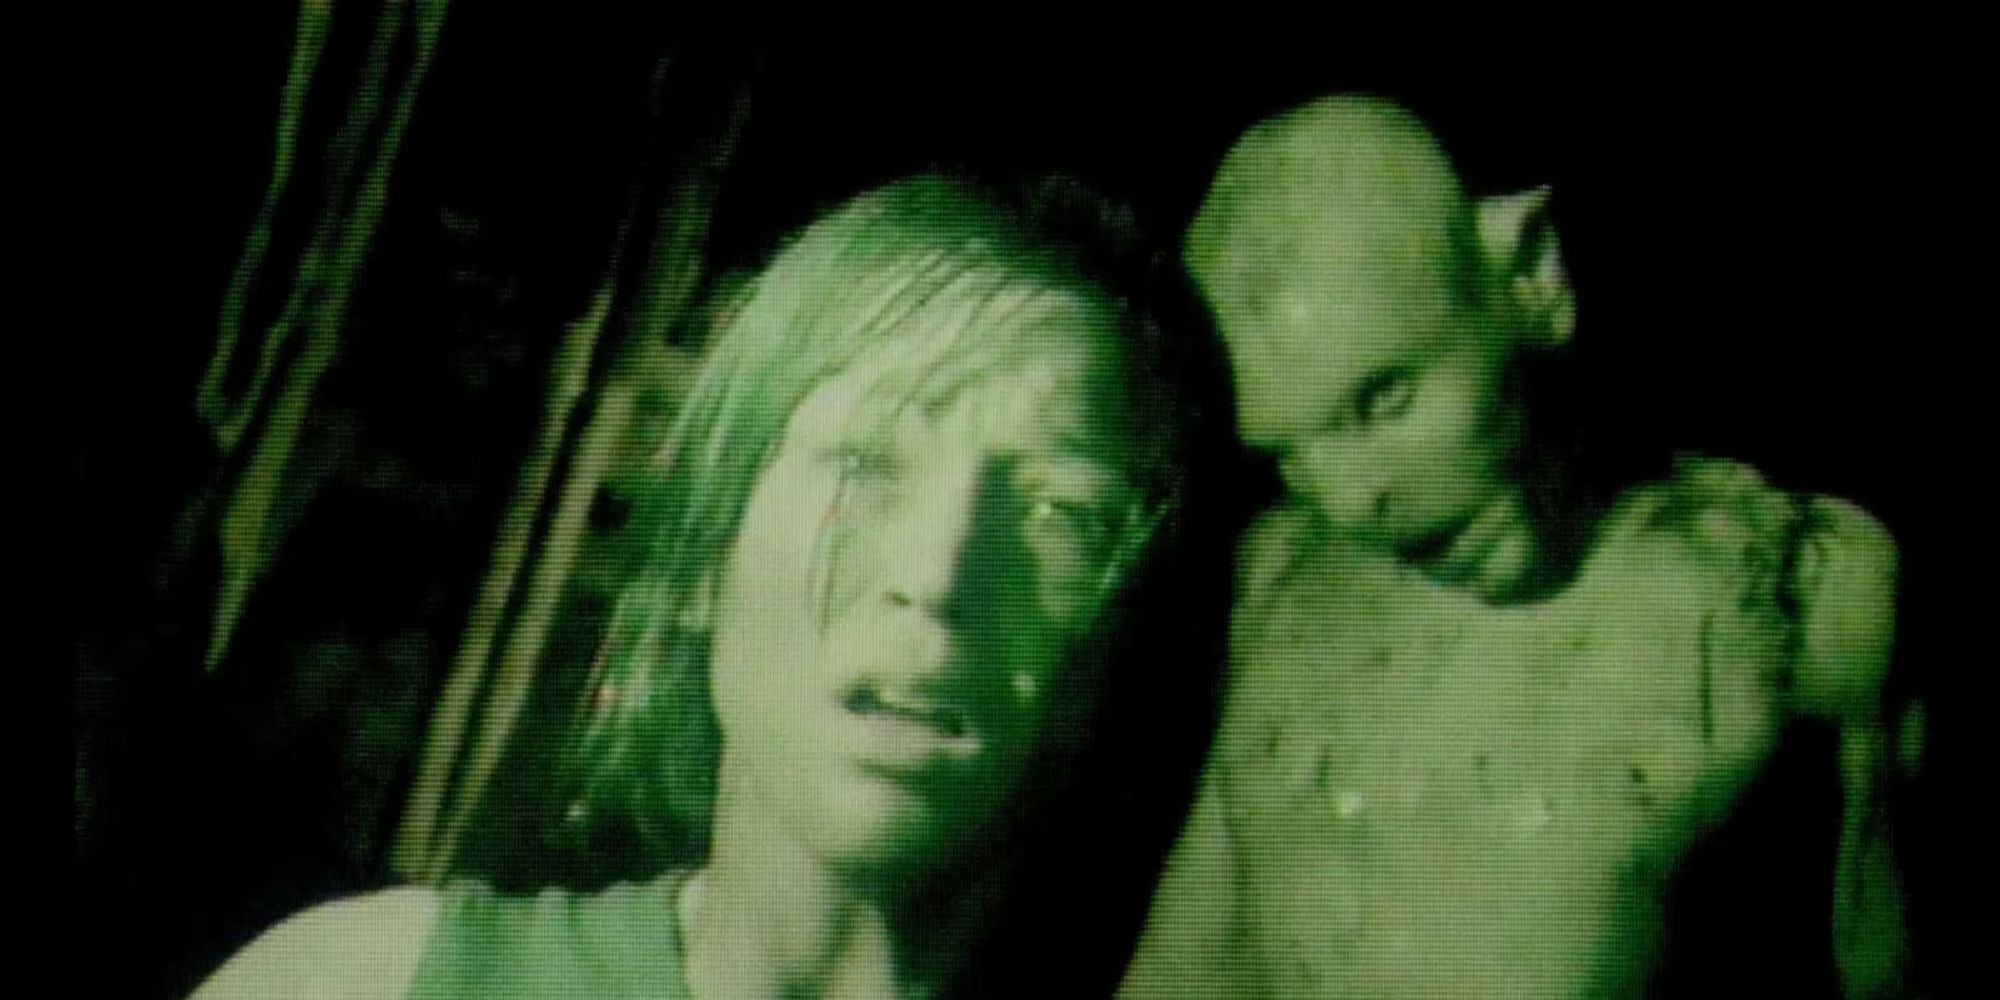 Creeper behind woman in night vision